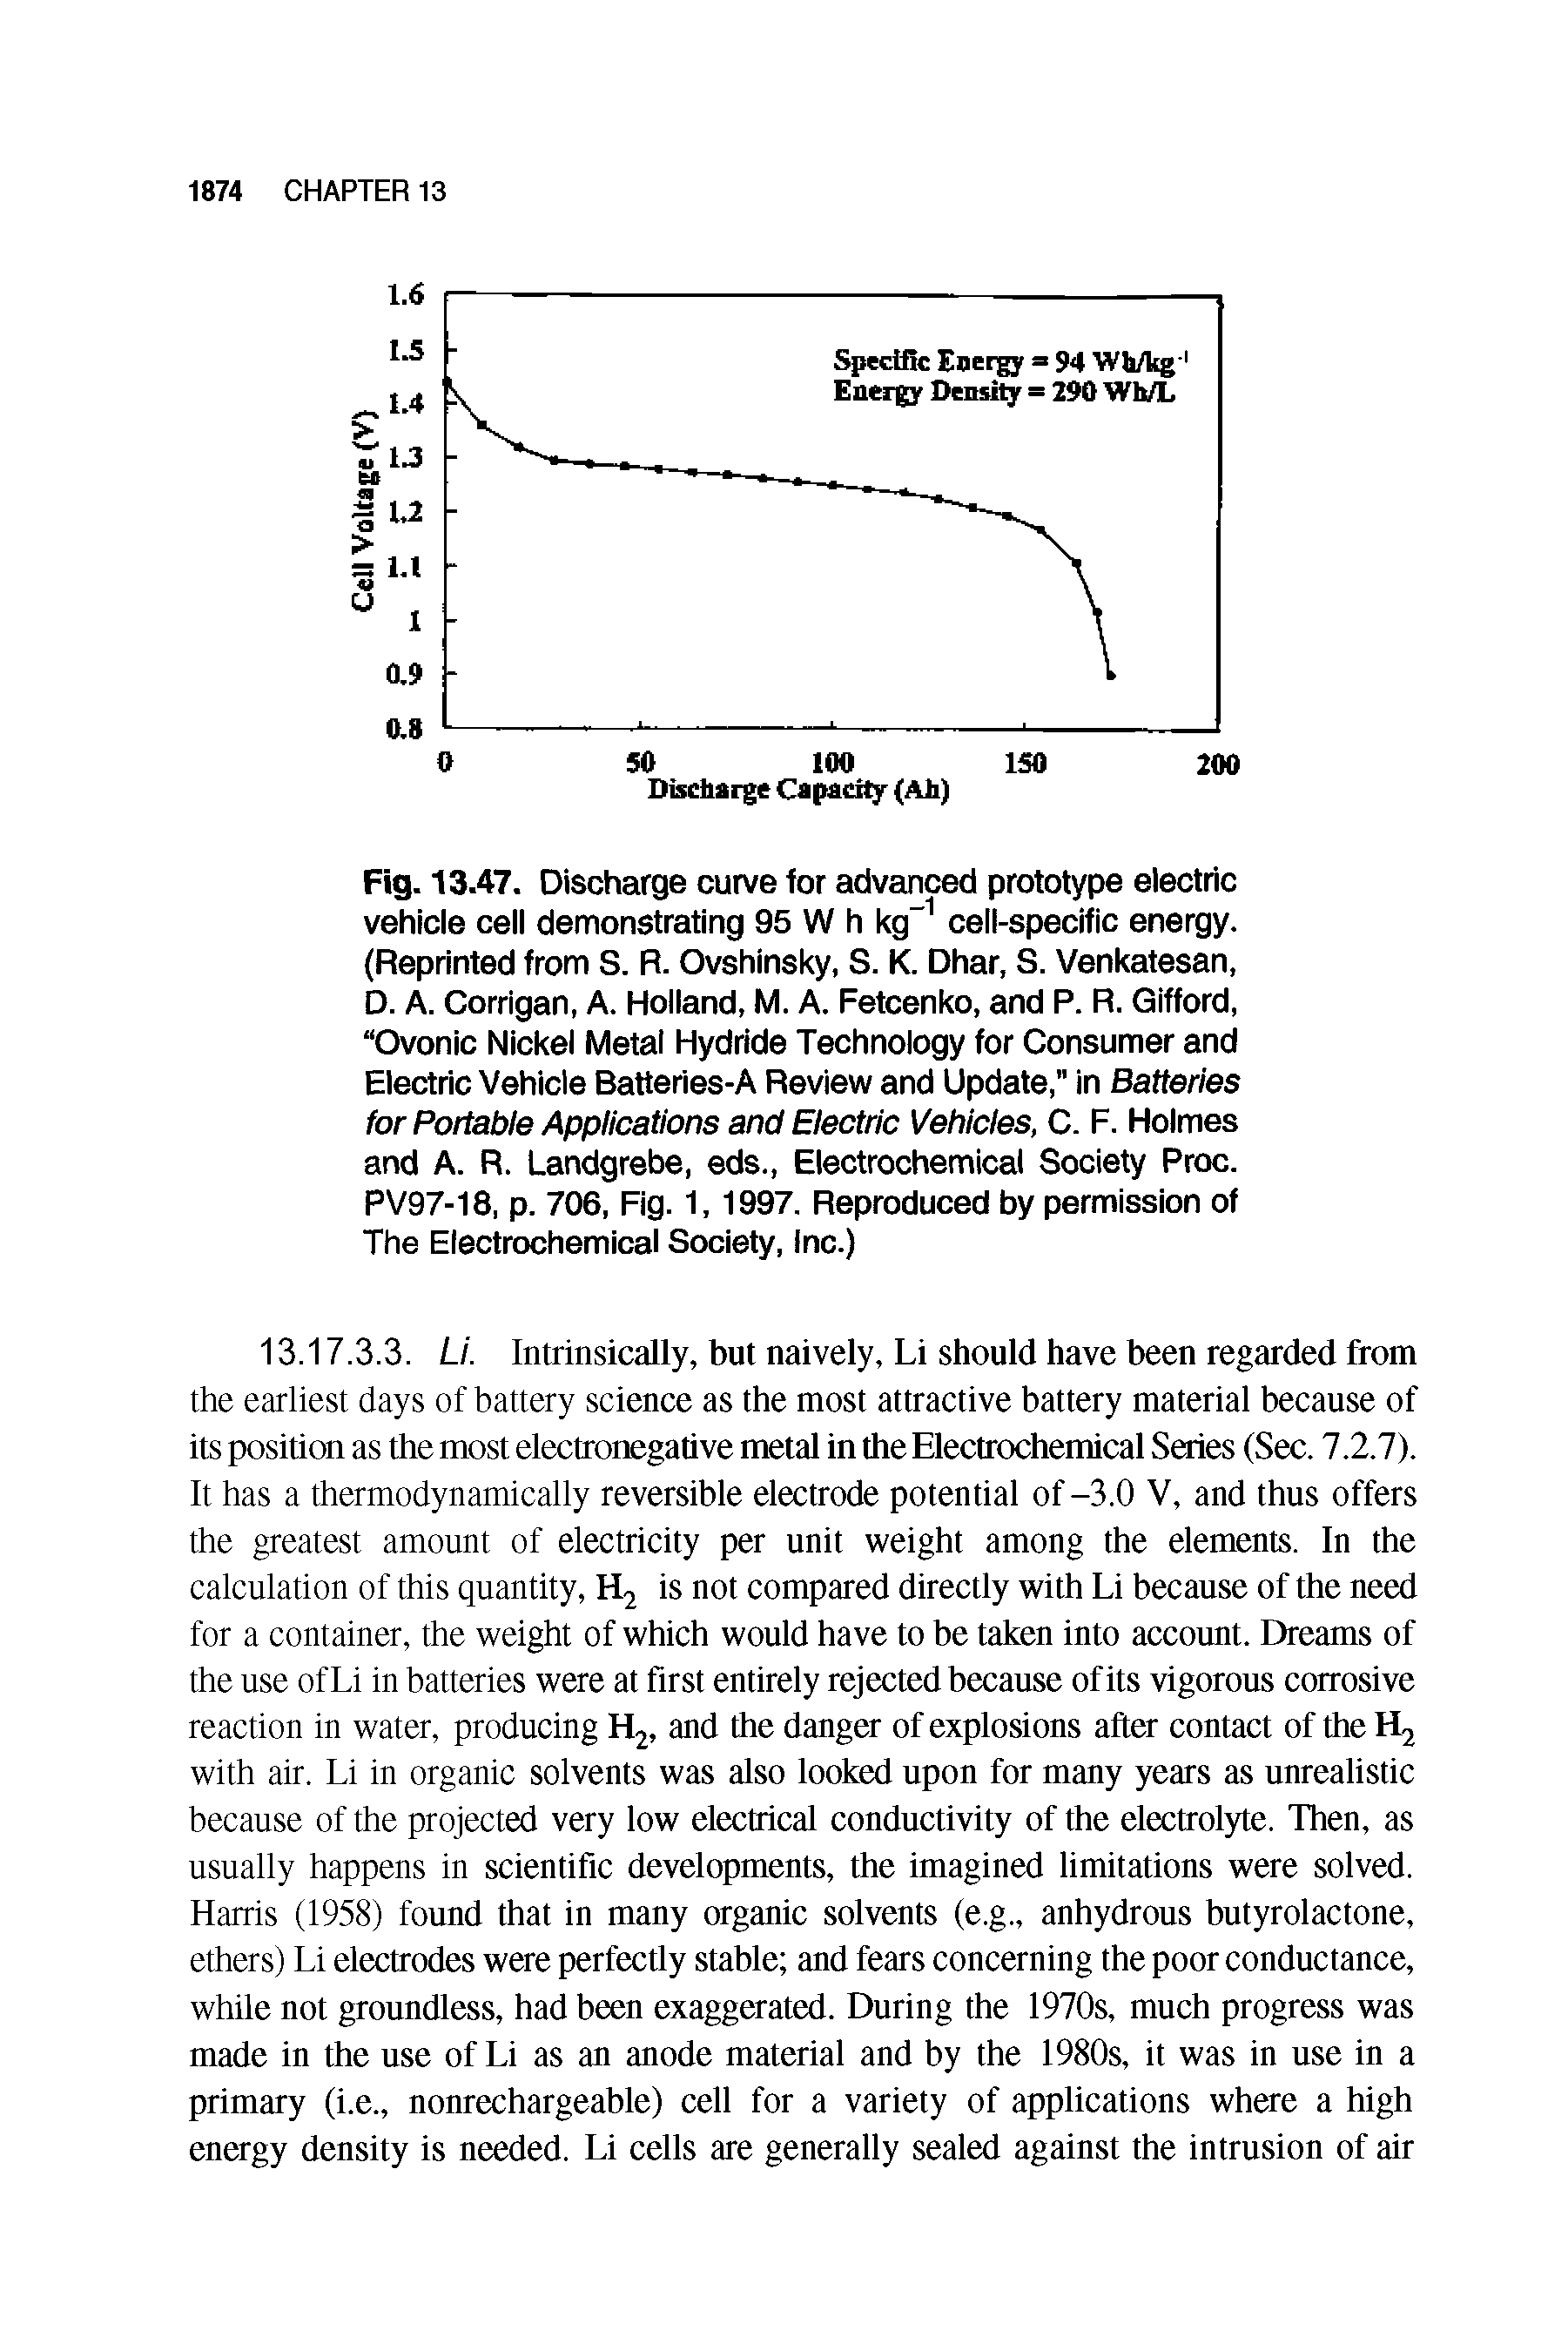 Fig. 13.47. Discharge curve for advanced prototype electric vehicle cell demonstrating 95 W h kg-1 cell-specific energy. (Reprinted from S. R. Ovshinsky, S. K. Dhar, S. Venkatesan, D. A. Corrigan, A. Holland, M. A. Fetcenko, and P. R. Gifford, Ovonic Nickel Metal Hydride Technology for Consumer and Electric Vehicle Batteries-A Review and Update," in Batteries for Portable Applications and Electric Vehicles, C. F. Holmes and A. R. Landgrebe, eds., Electrochemical Society Proc. PV97-18, p. 706, Fig. 1, 1997. Reproduced by permission of The Electrochemical Society, Inc.)...